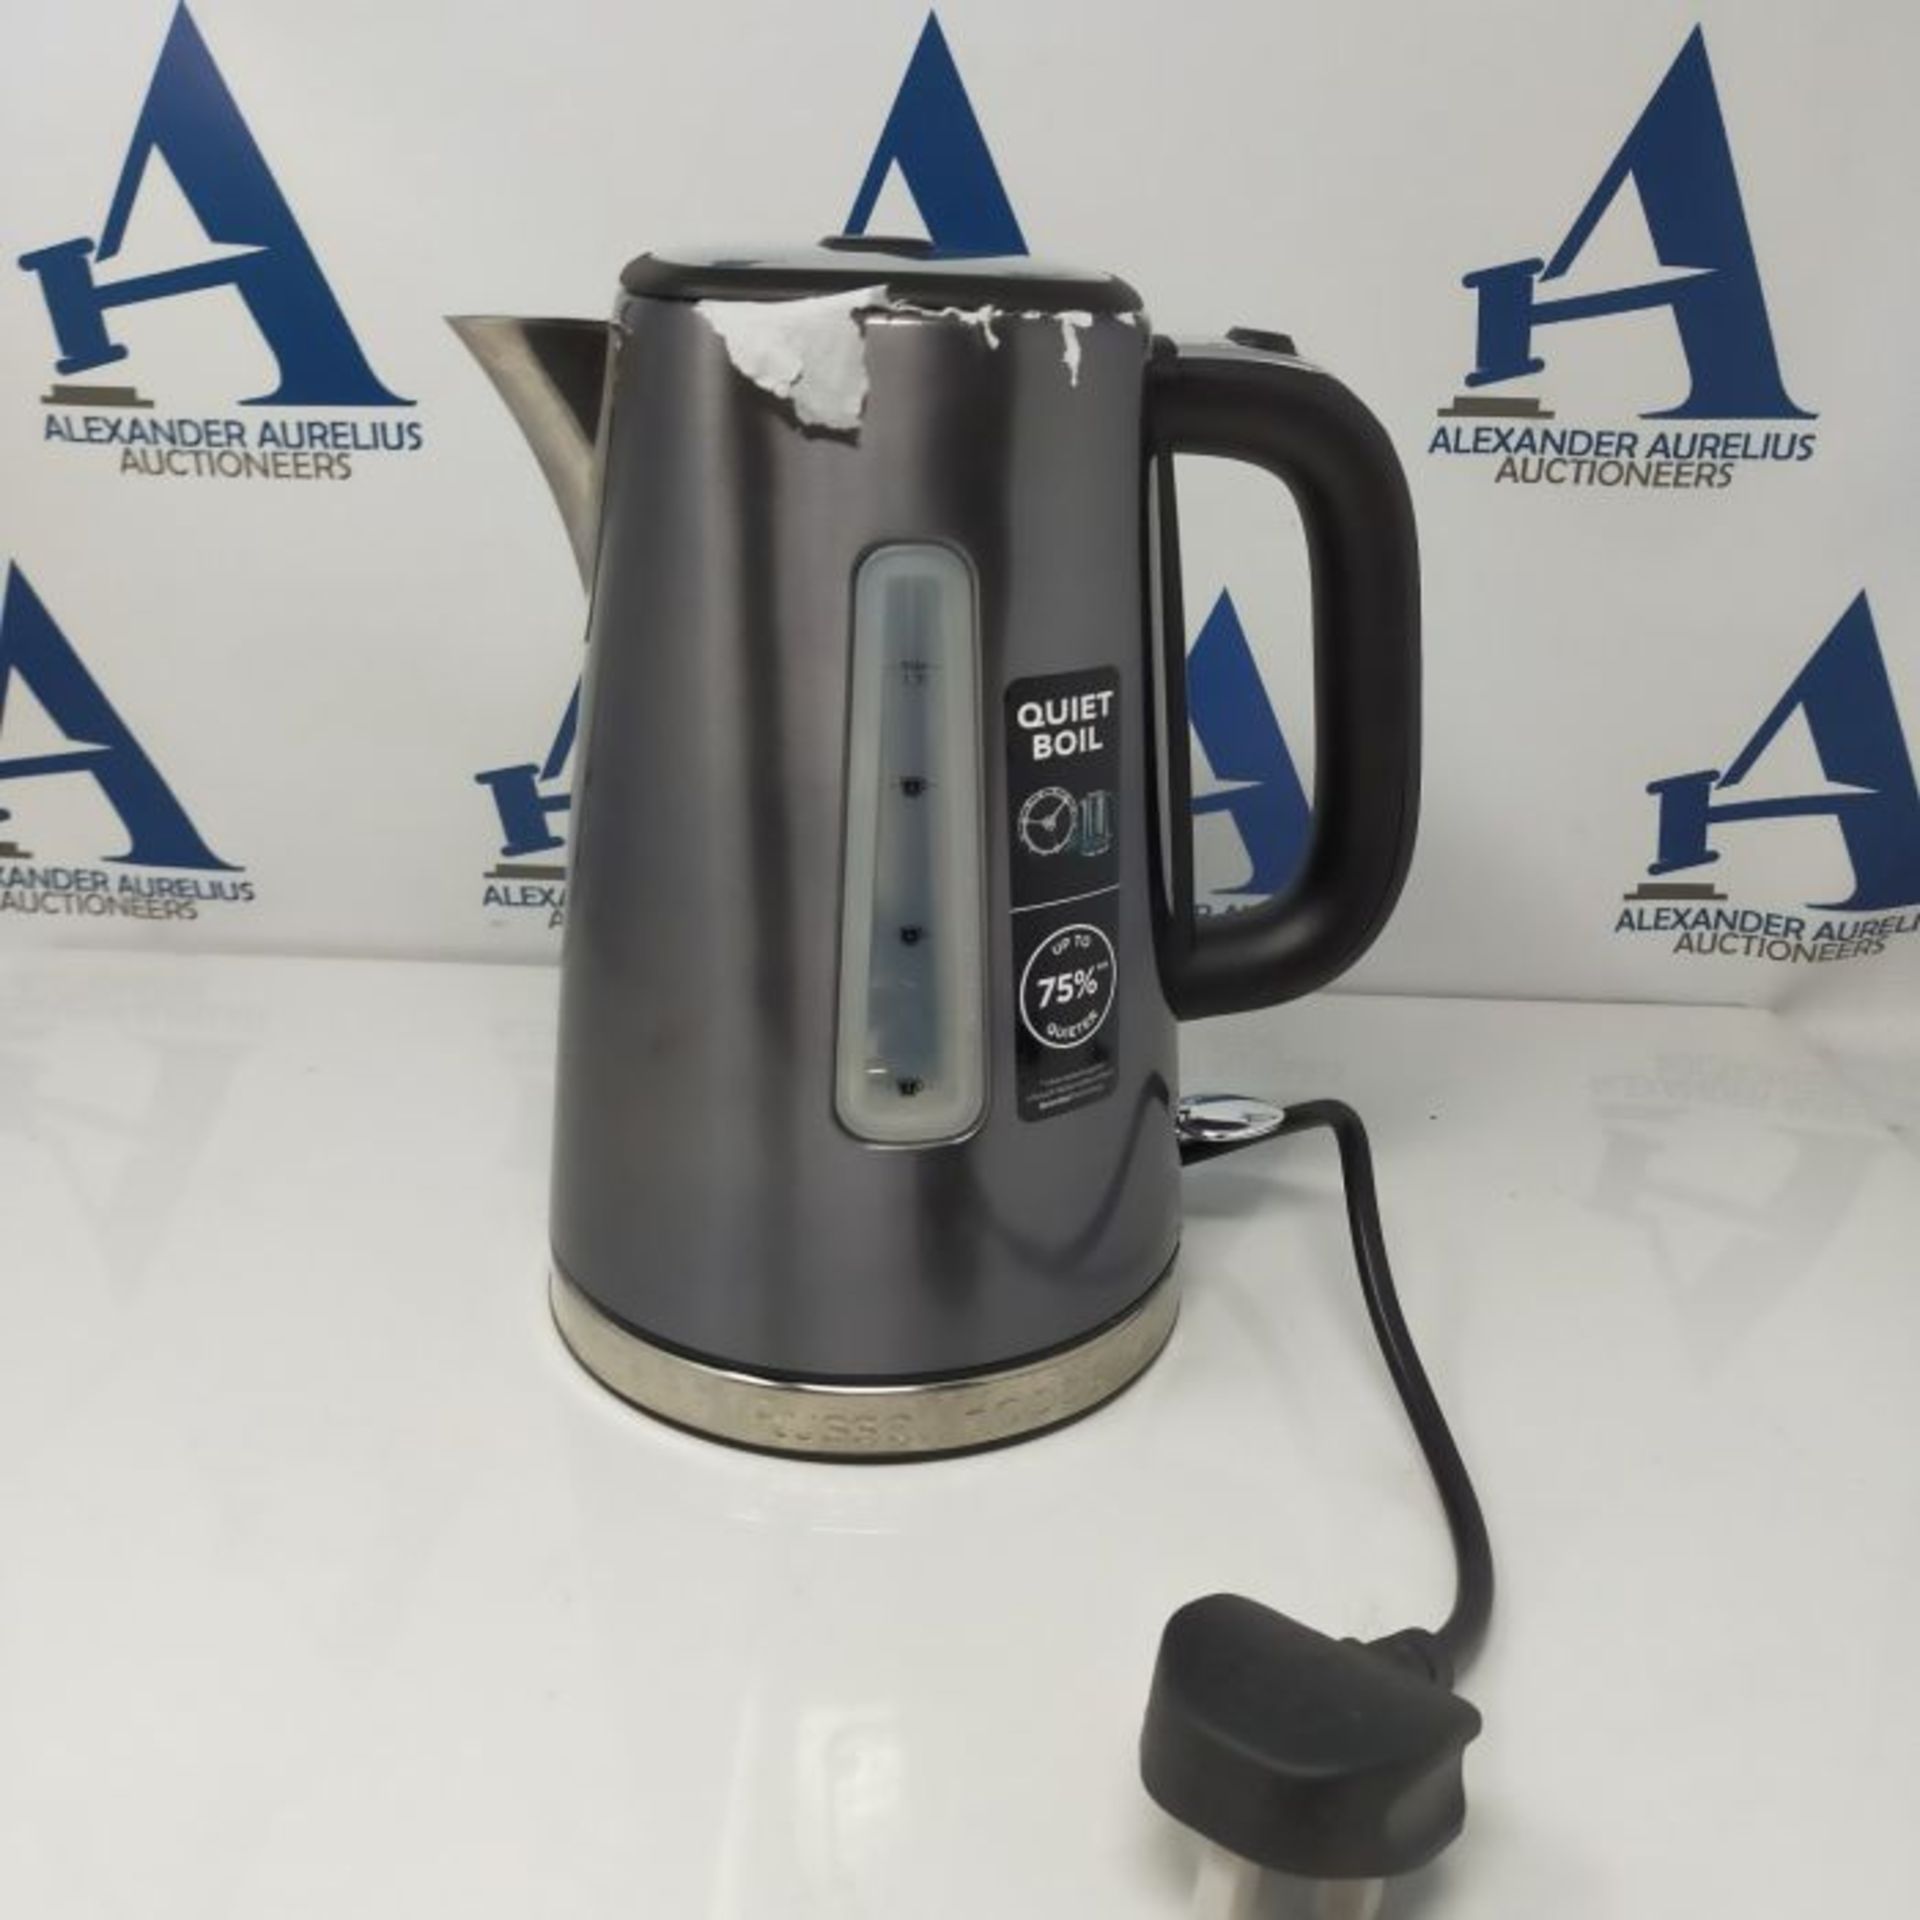 RRP £54.00 Russell Hobbs 23211 Luna Quiet Boil Electric Kettle, Stainless Steel, 3000 W, 1.7 Litr - Image 2 of 3